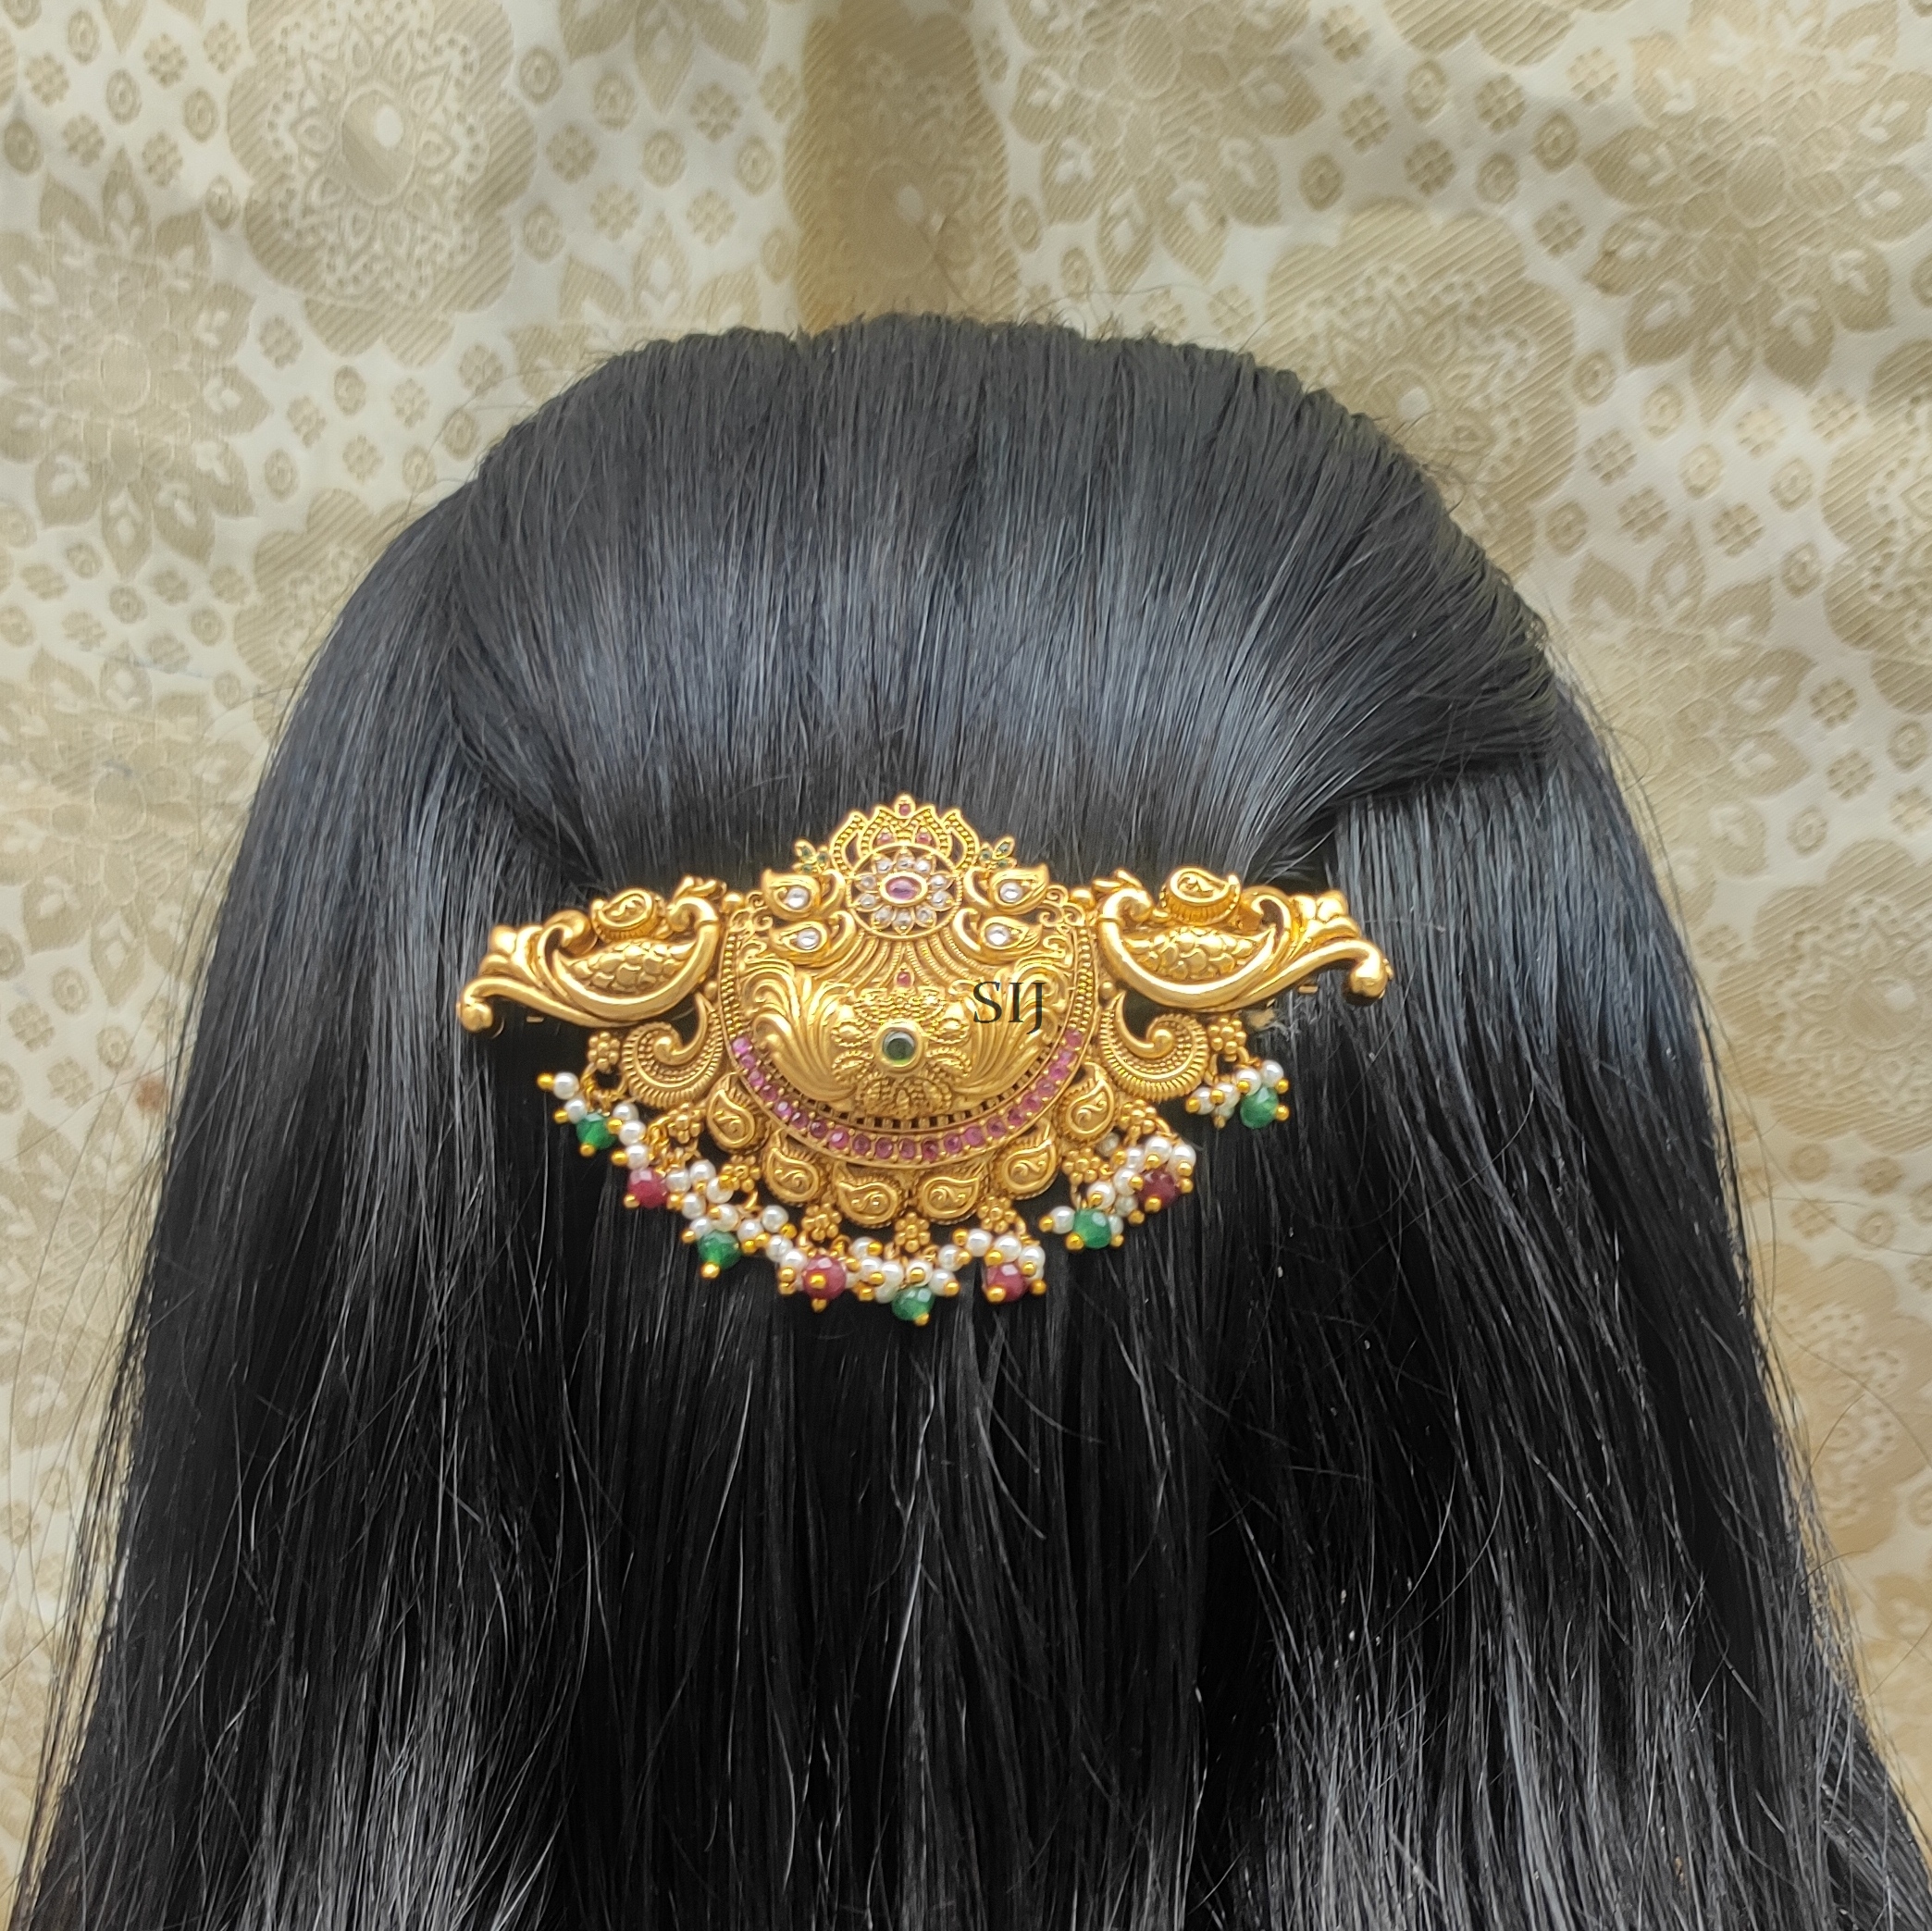 Imitation Hair Clip With Beaded Hanging